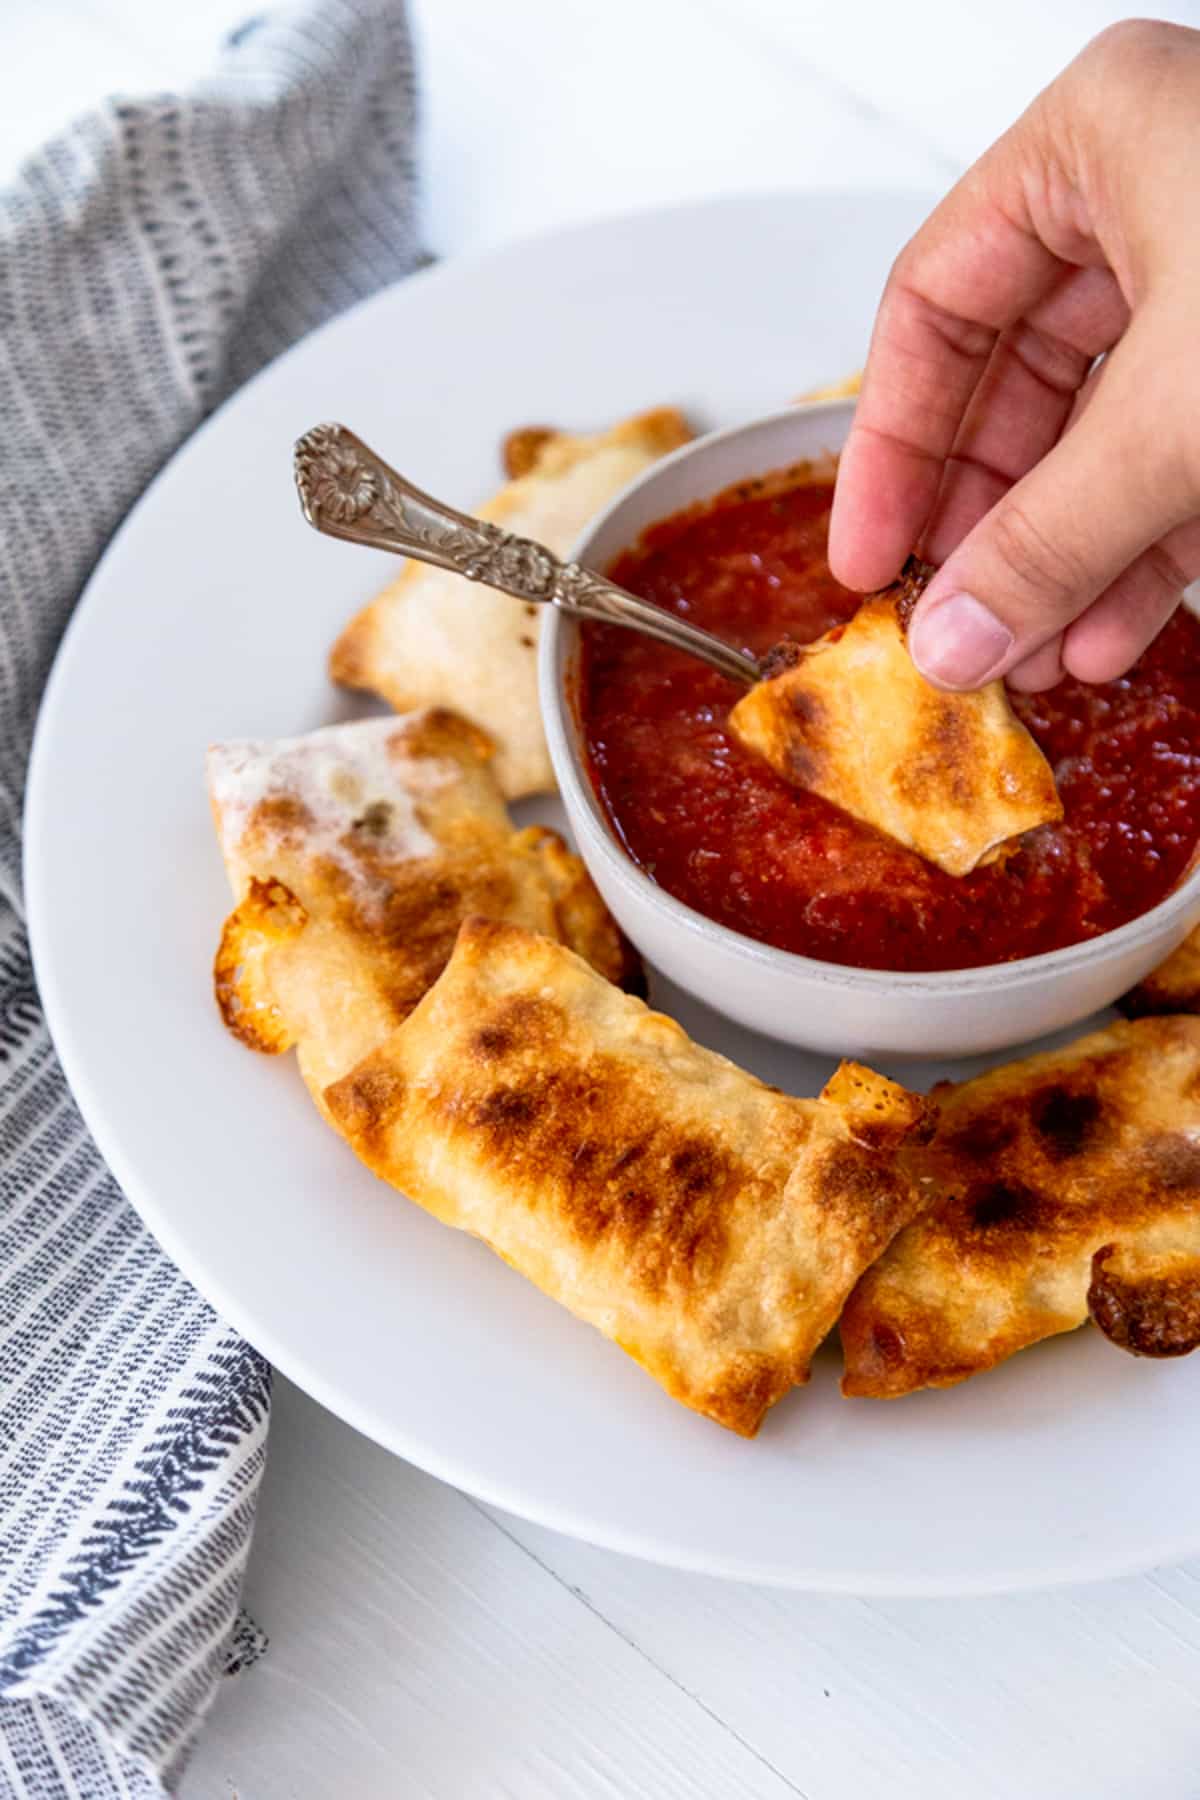 A hand dipping a pizza roll into a bowl of marinara sauce.